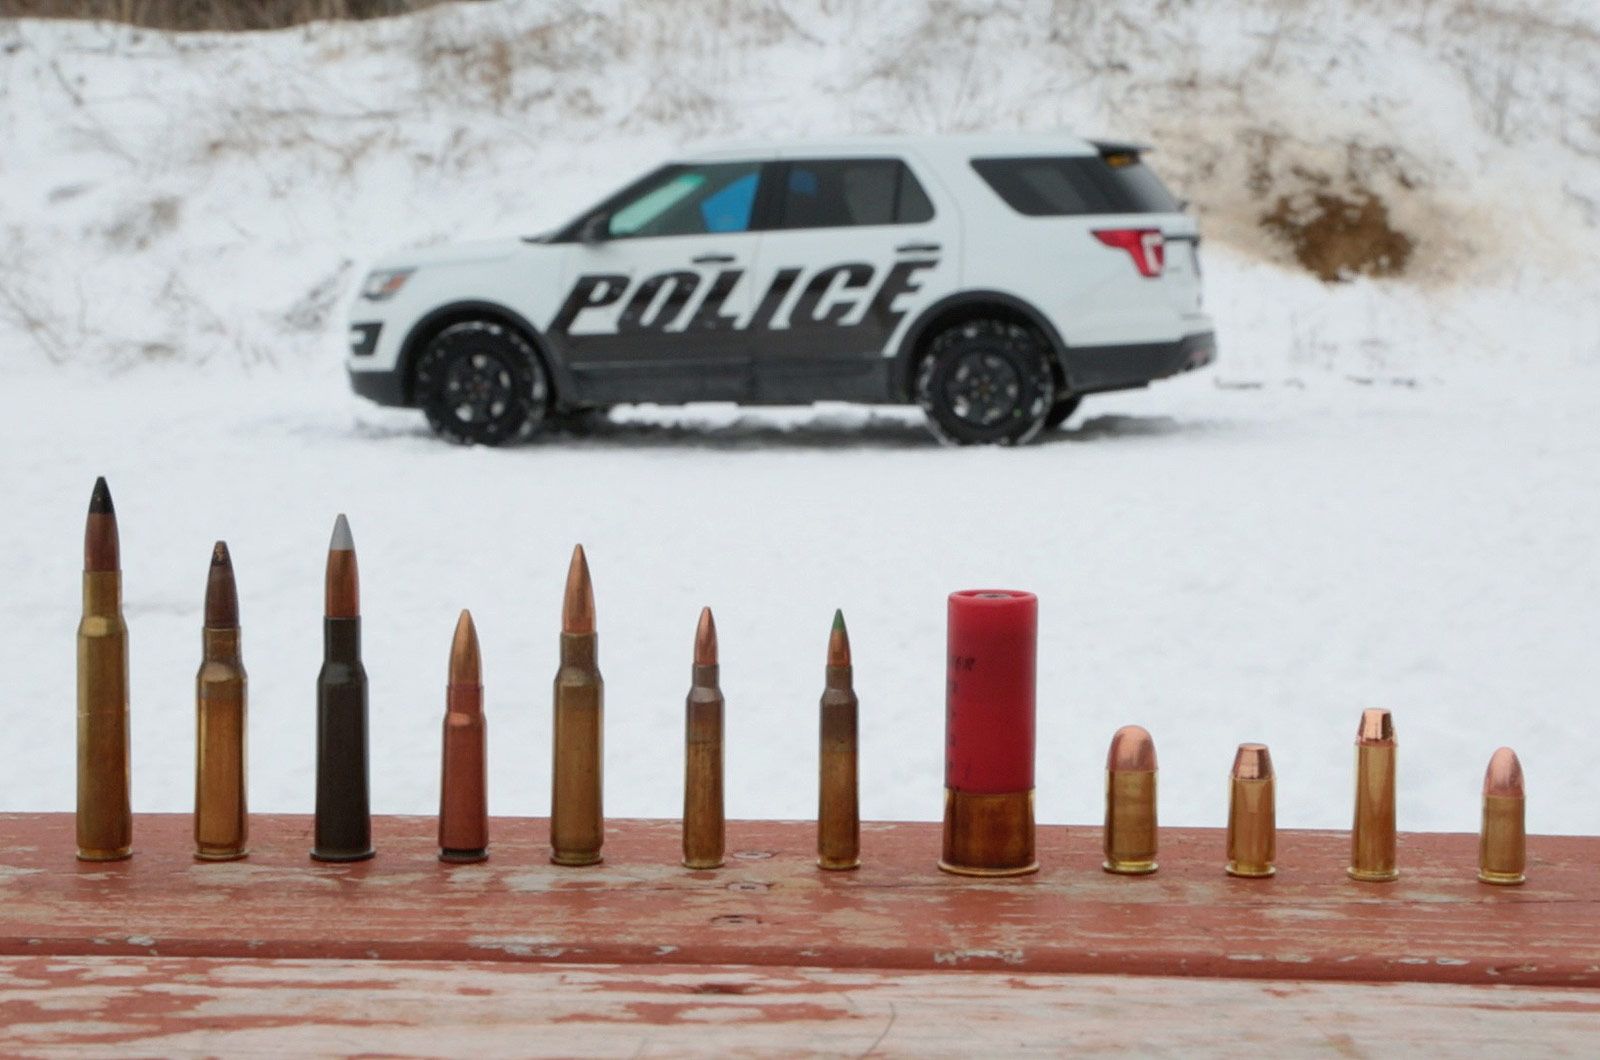 Bulletproof police car protects against armor-piercing bullets